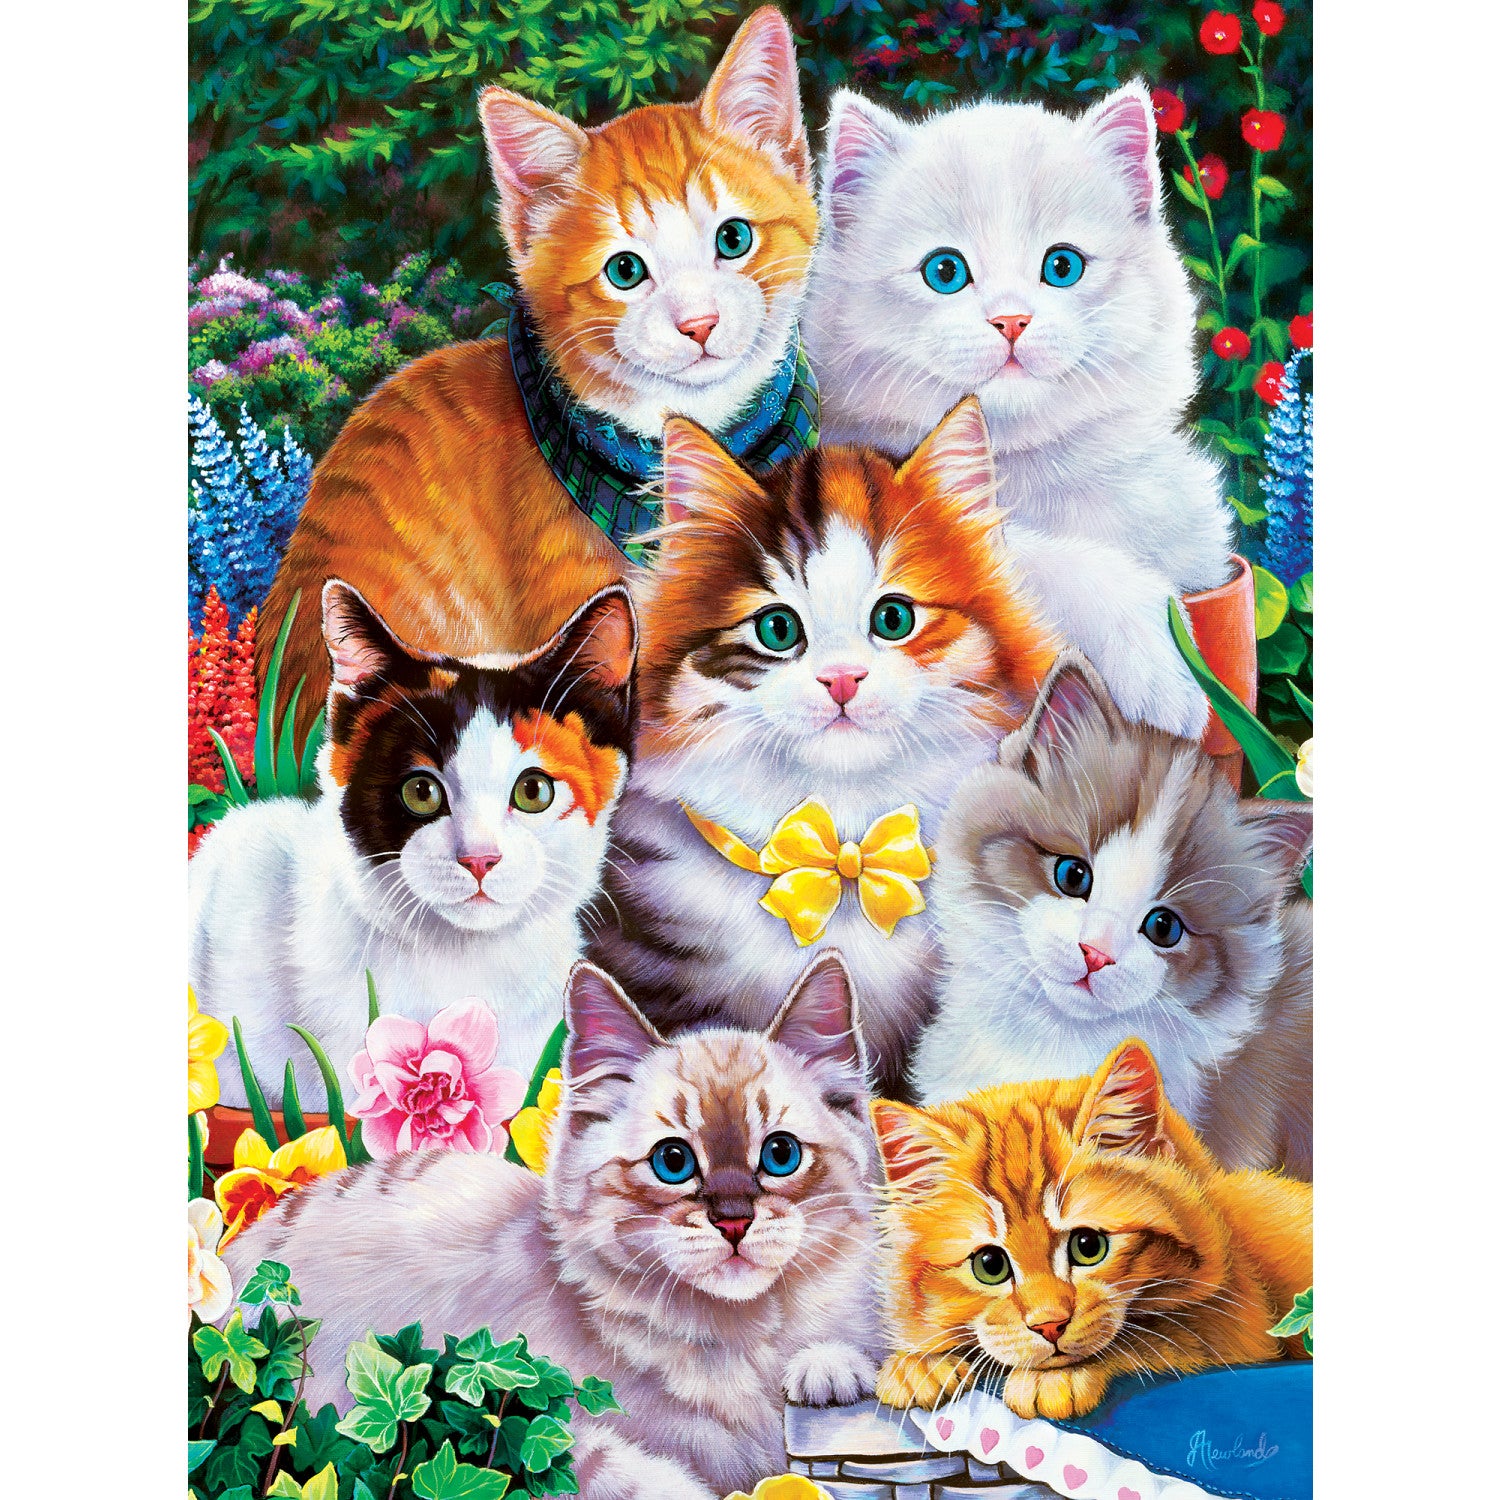 Playful Paws - Purrfectly Adorable 300 Piece Puzzle